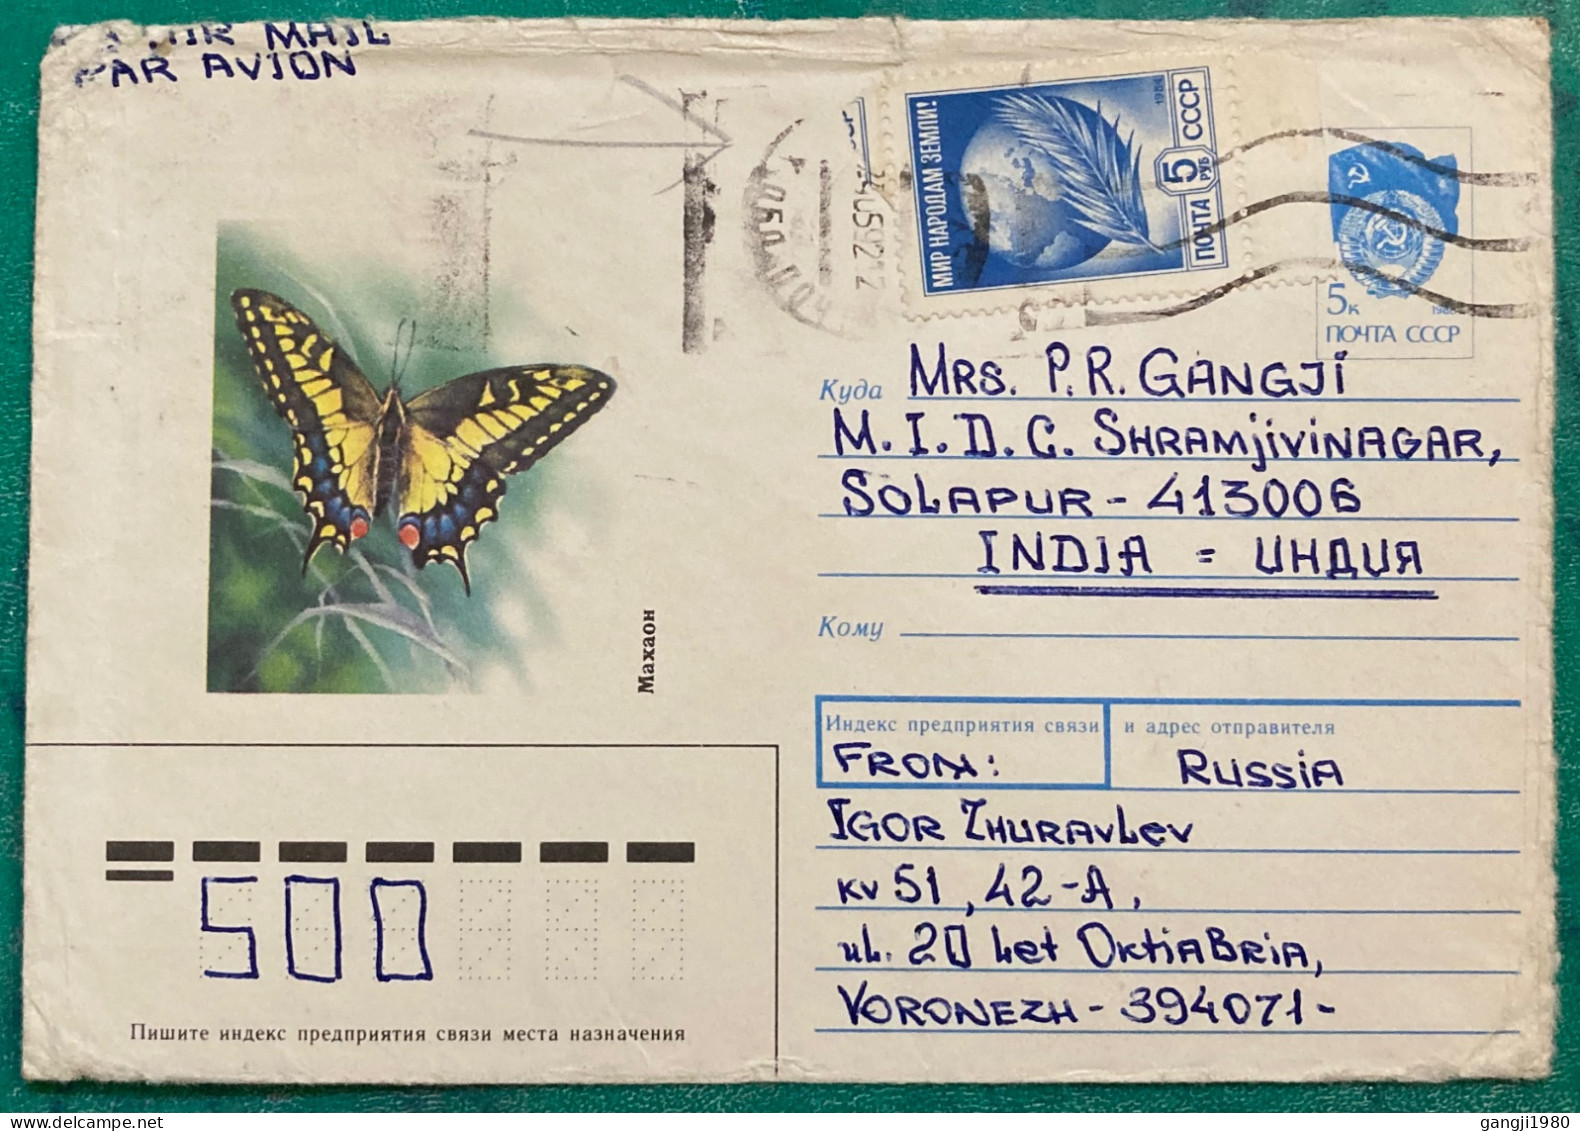 RUSSIA TO INDIA COVER USED 1992, STATIONERY COVER, ILLUSTRATE, BUTTERFLY,  GLOBE & FEATHER, COAT OF ARM FLAG, KORONEZ CI - Lettres & Documents